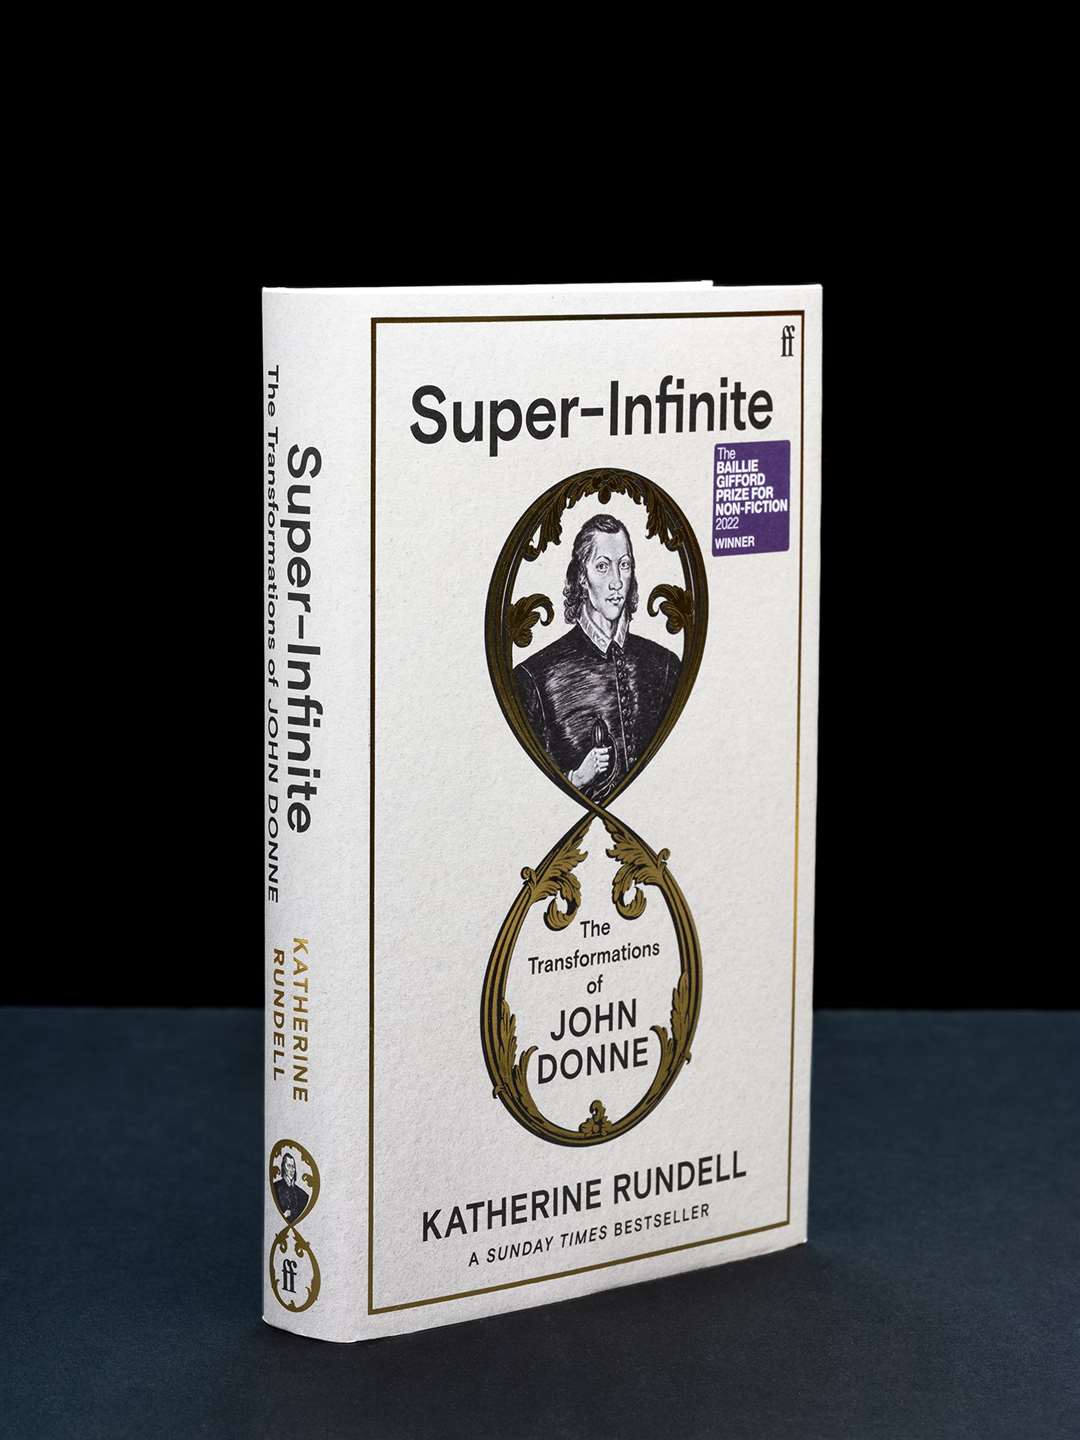 Katherine Rundell’s Super-Infinite is a non-fiction book about the poet John Donne (The Sunday Times Charlotte Aitken Young Writer Award/PA)